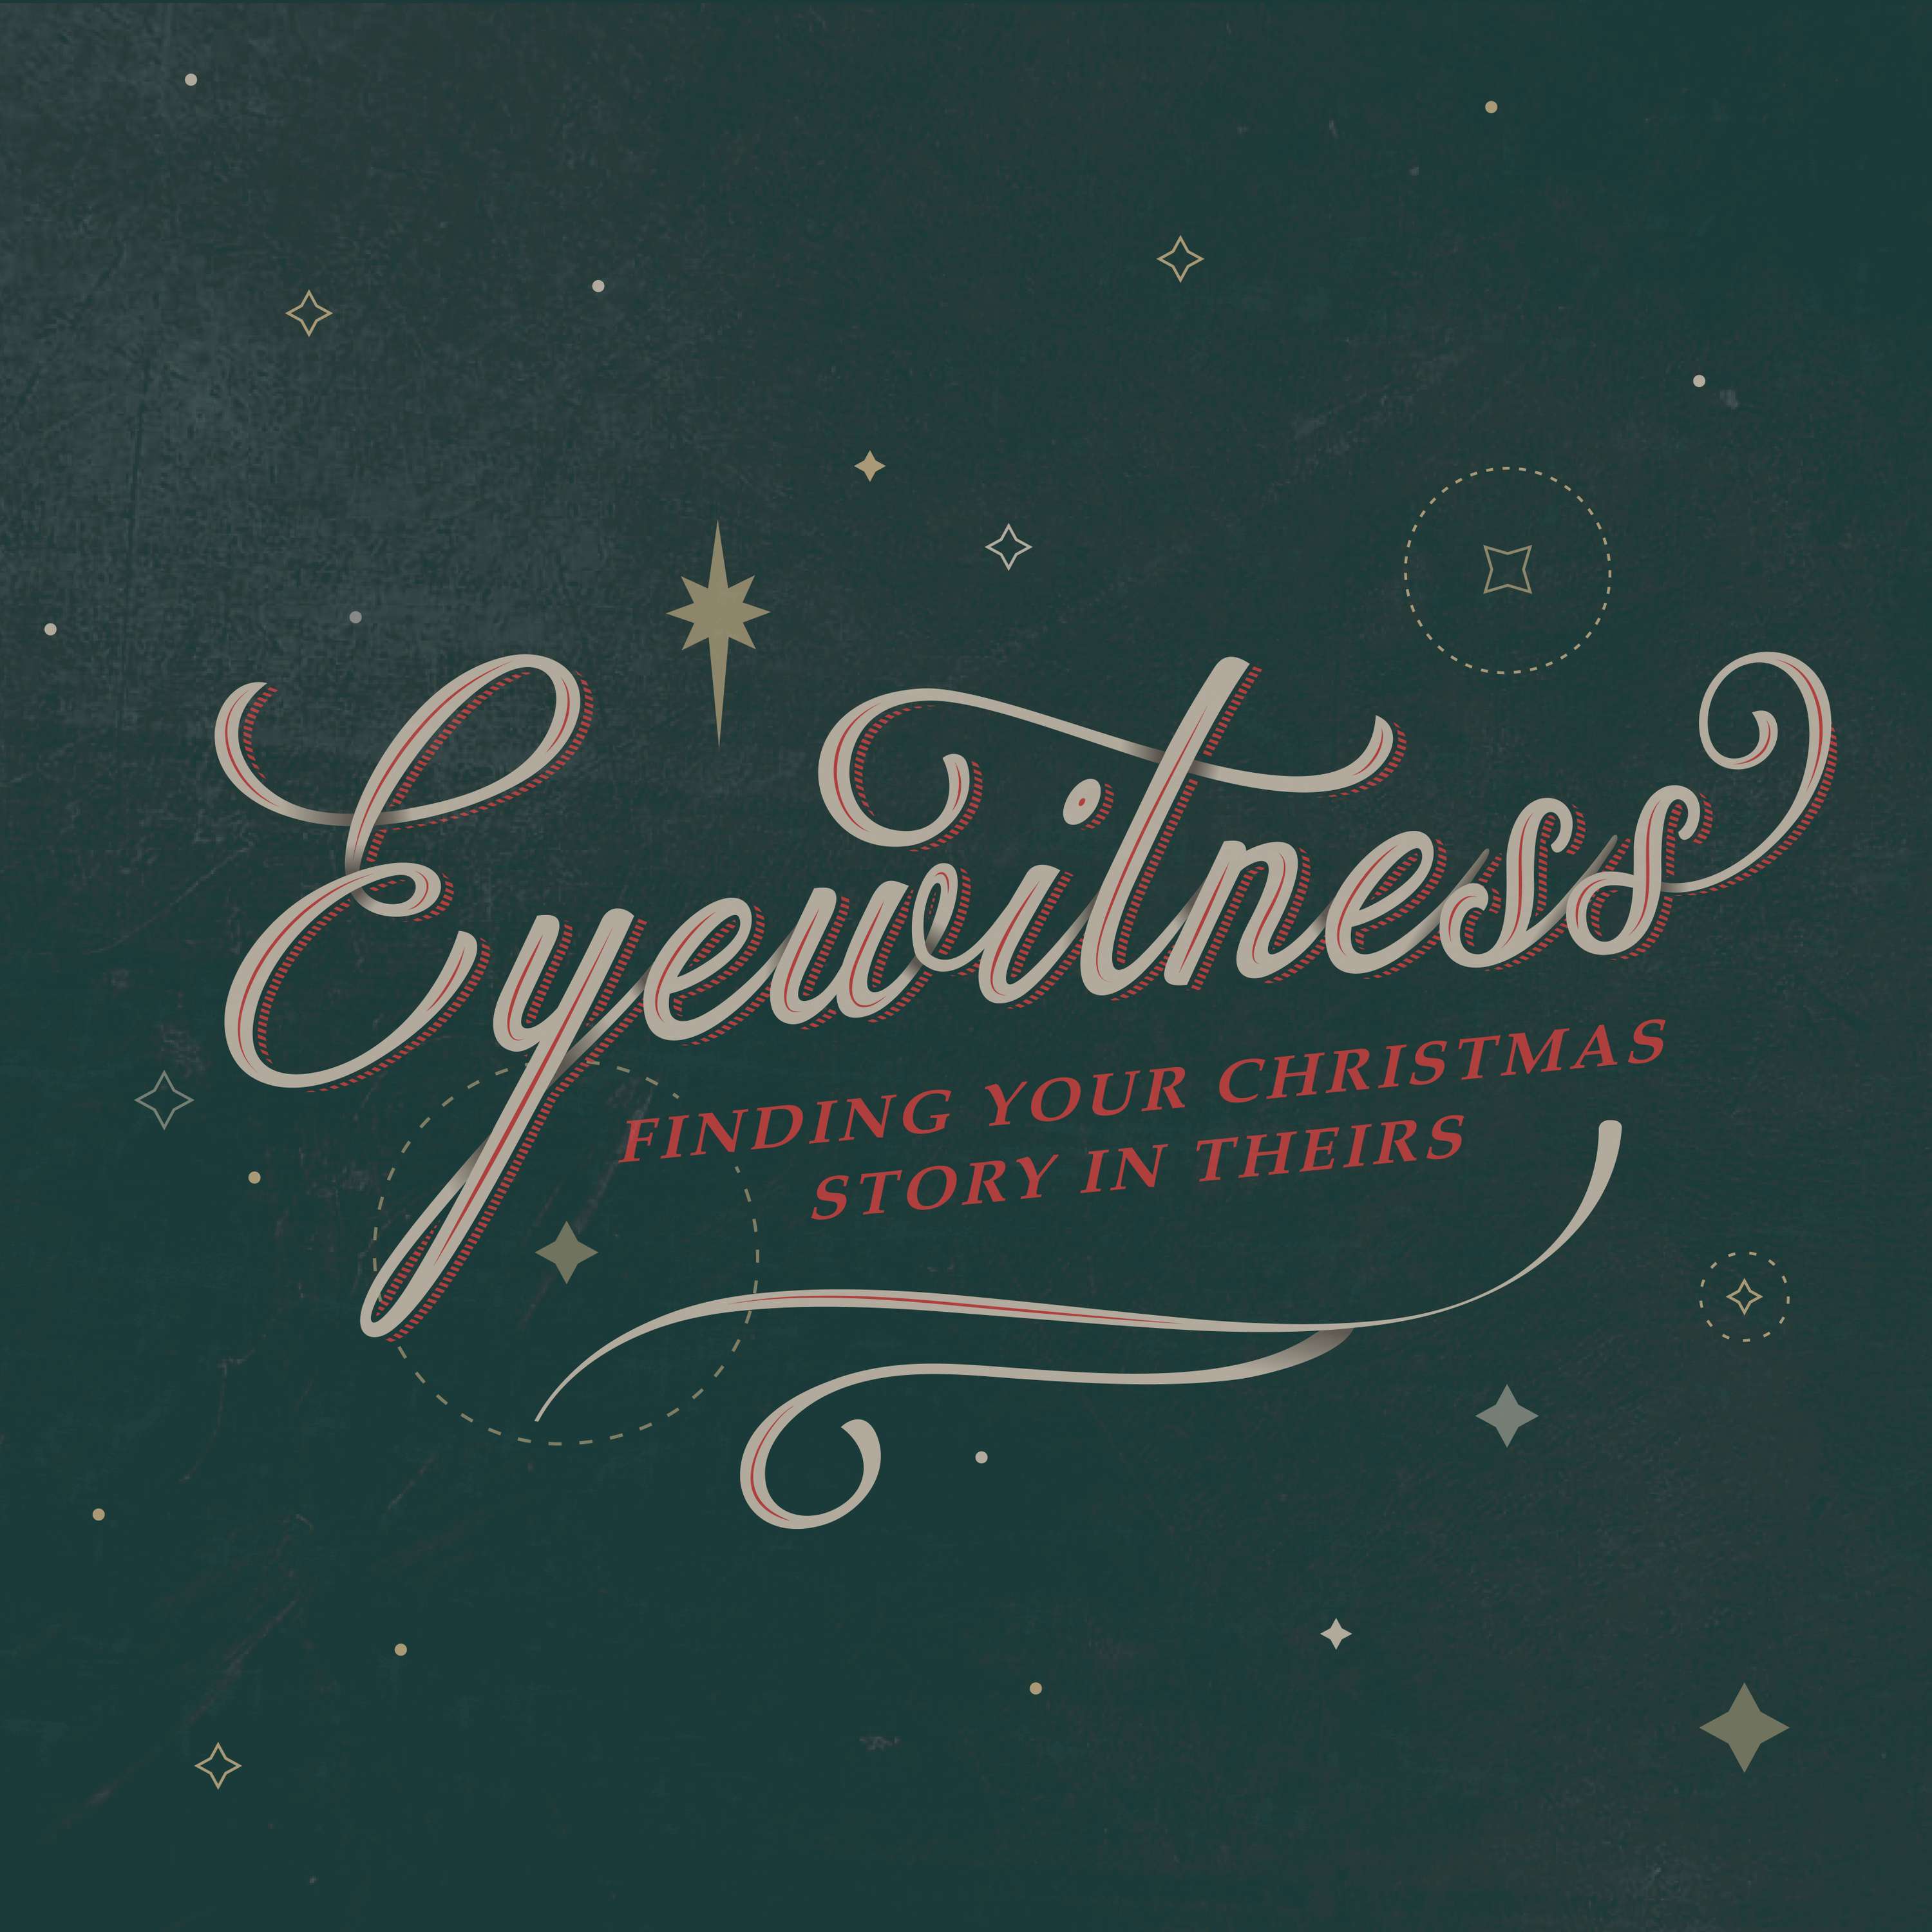 Eyewitness - Part 1: Believing the Impossible - Woodside Bible Church